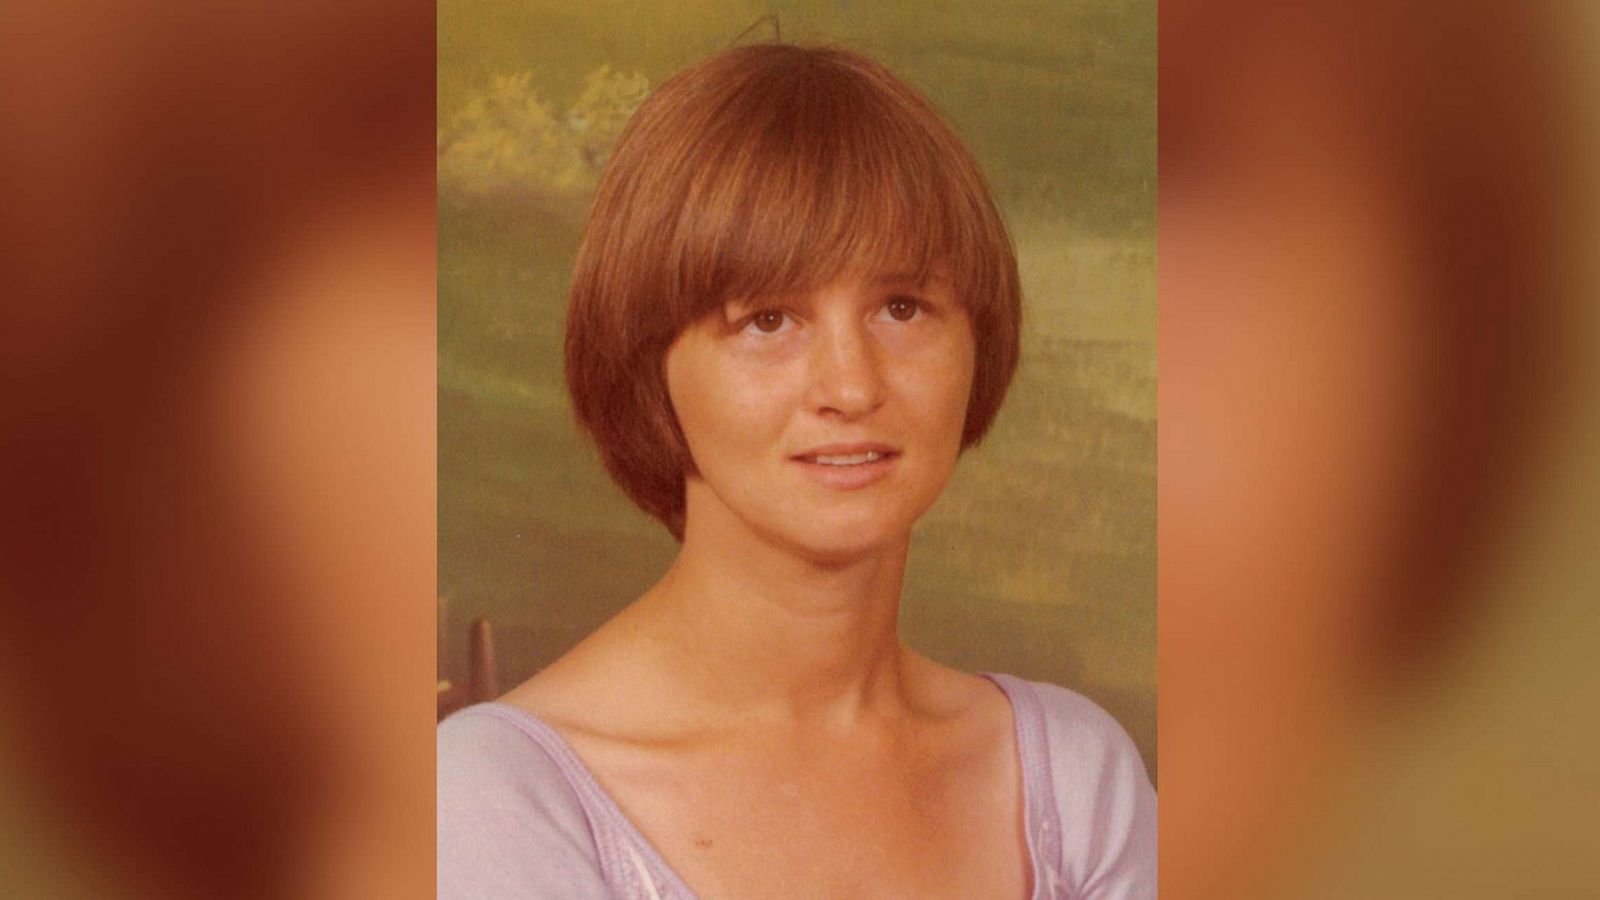 Mom Rapid His Son - Son's former football coach arrested for mom's 1981 murder - ABC News